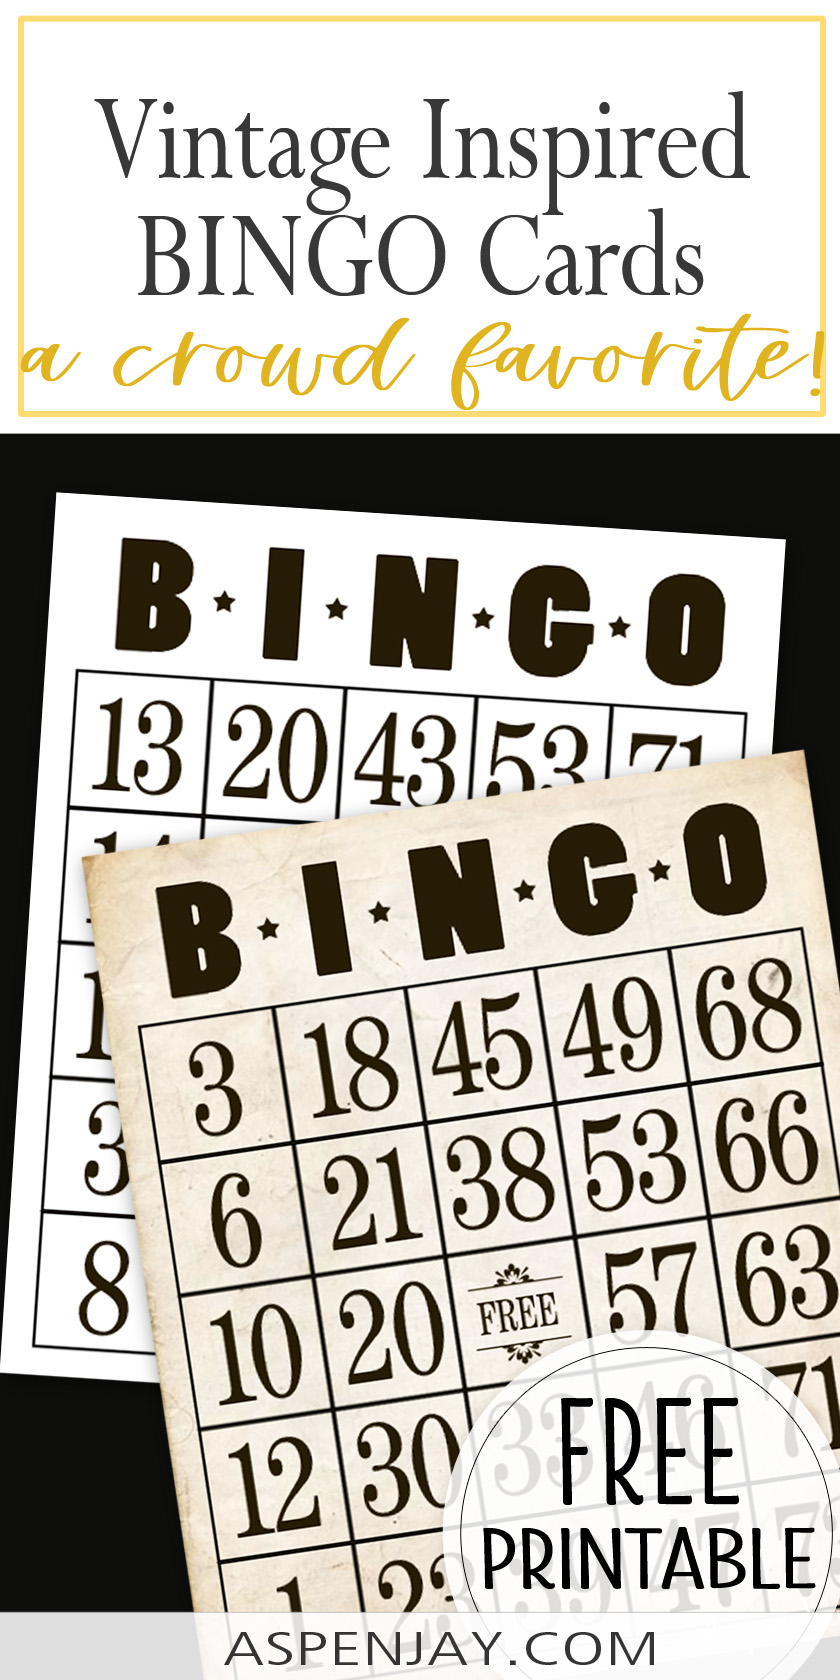 FREE vintage inspired printable bingo cards that would be perfect for your next round of bingo!